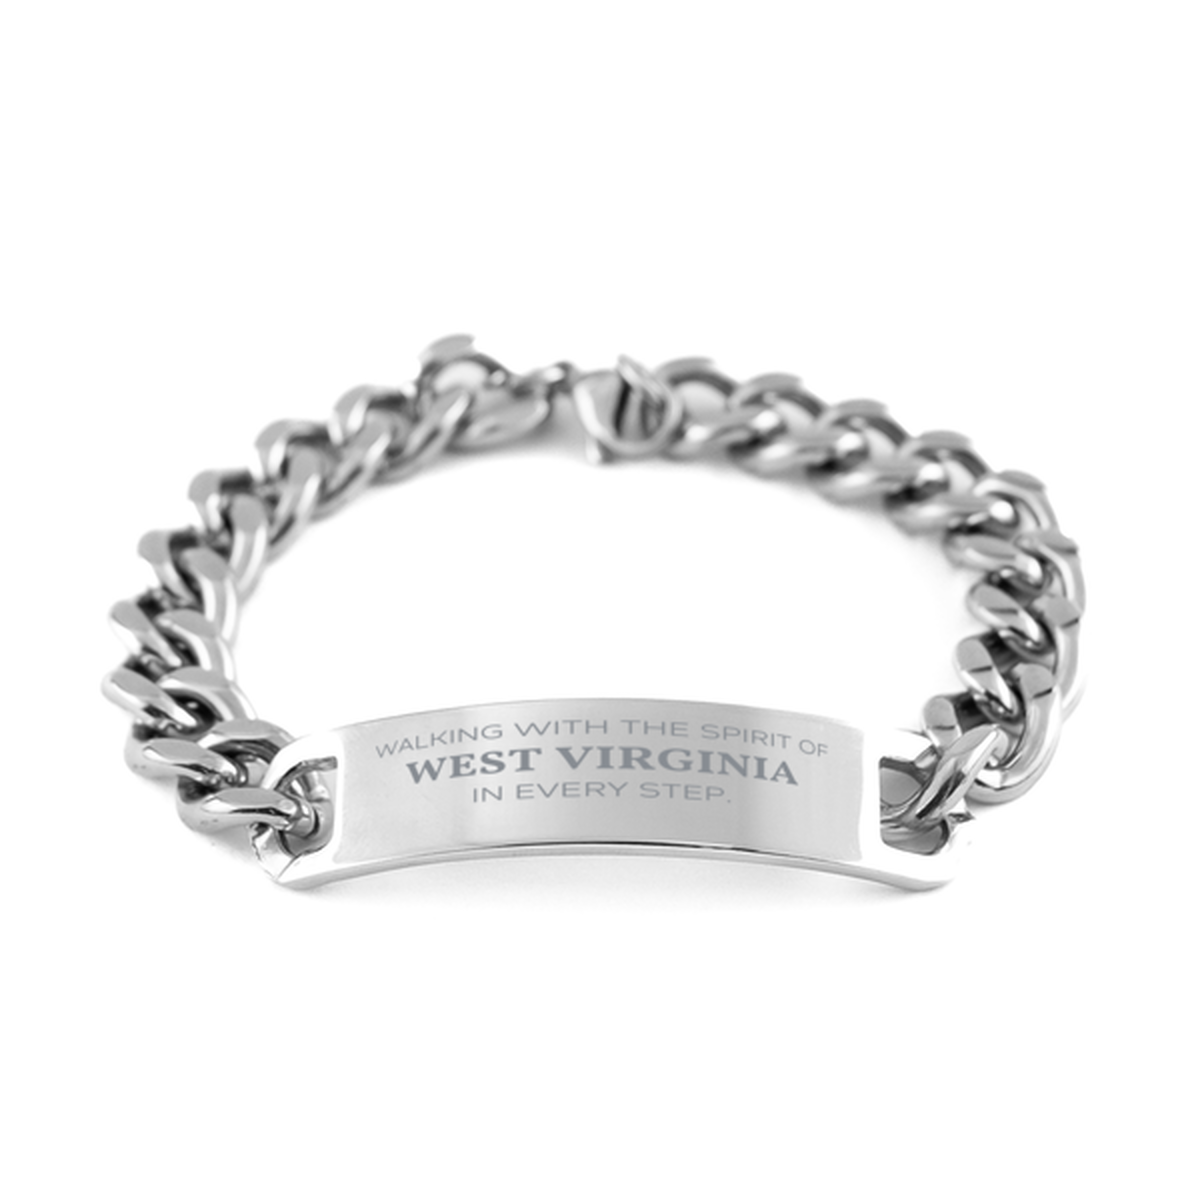 West Virginia Gifts, Walking with the spirit, Love West Virginia Birthday Christmas Cuban Chain Stainless Steel Bracelet For West Virginia People, Men, Women, Friends